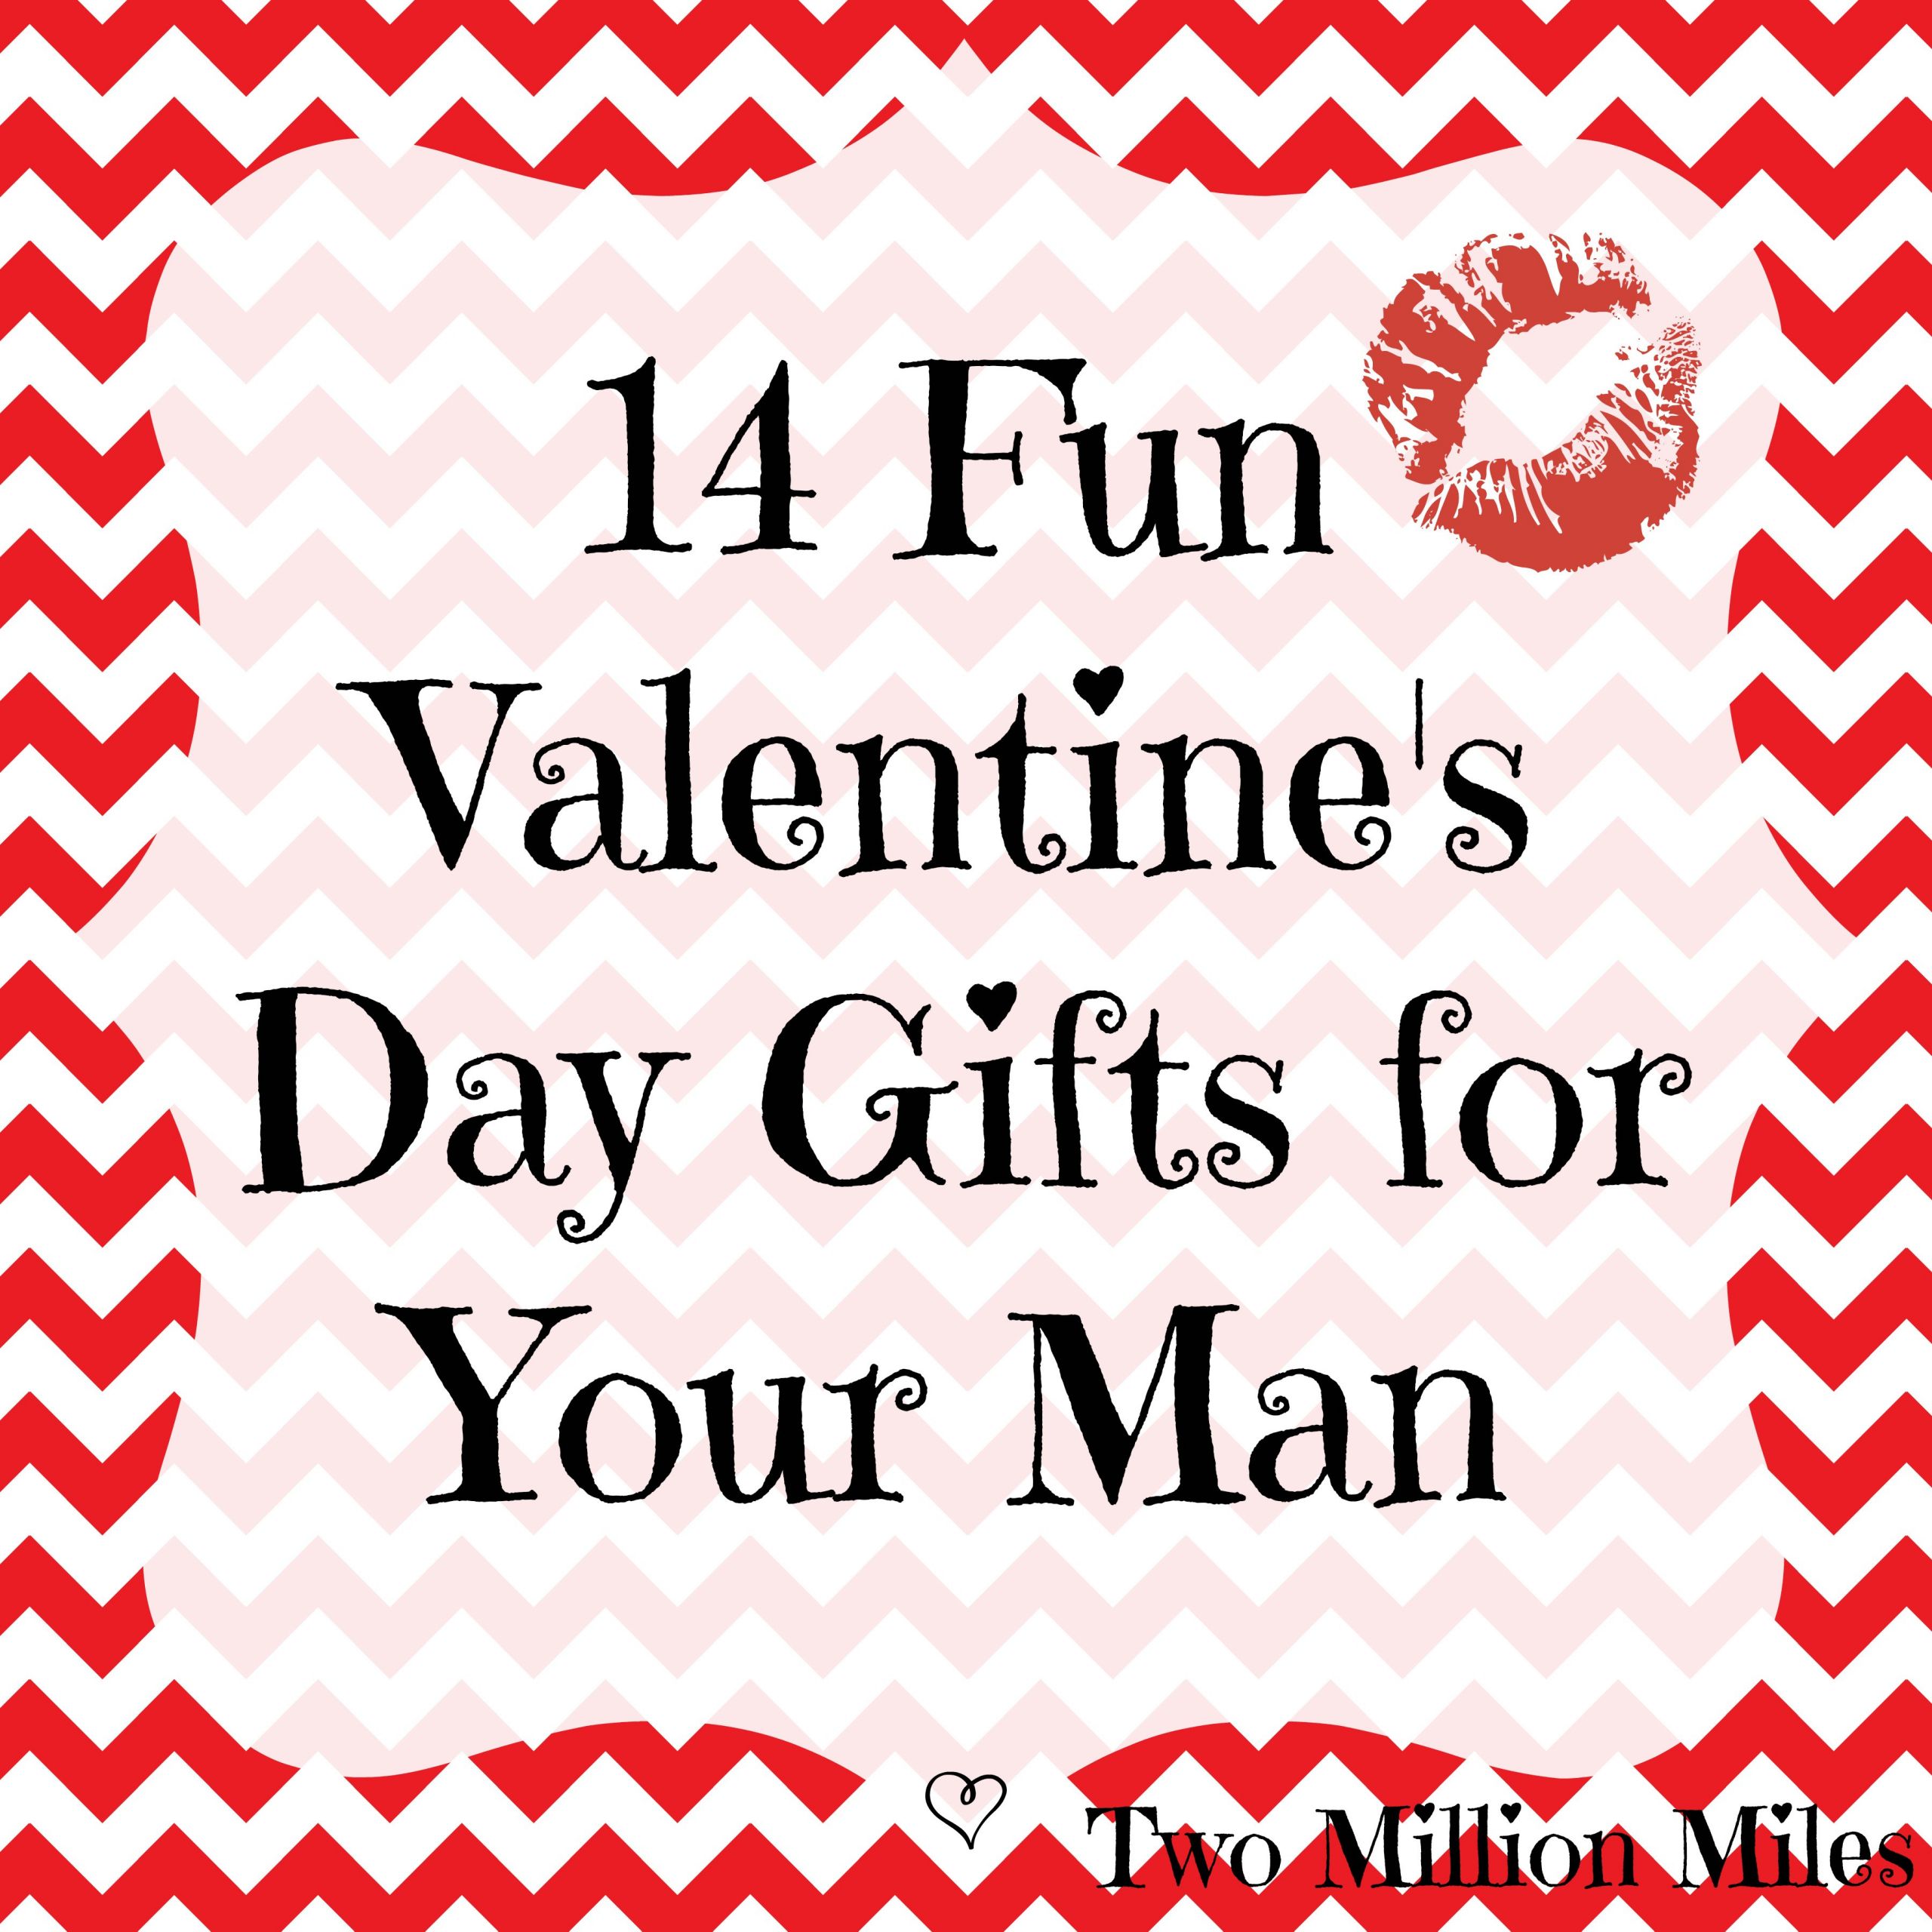 Valentines Day Gift Ideas Guys
 14 Valentine’s Day Gifts for Your Man